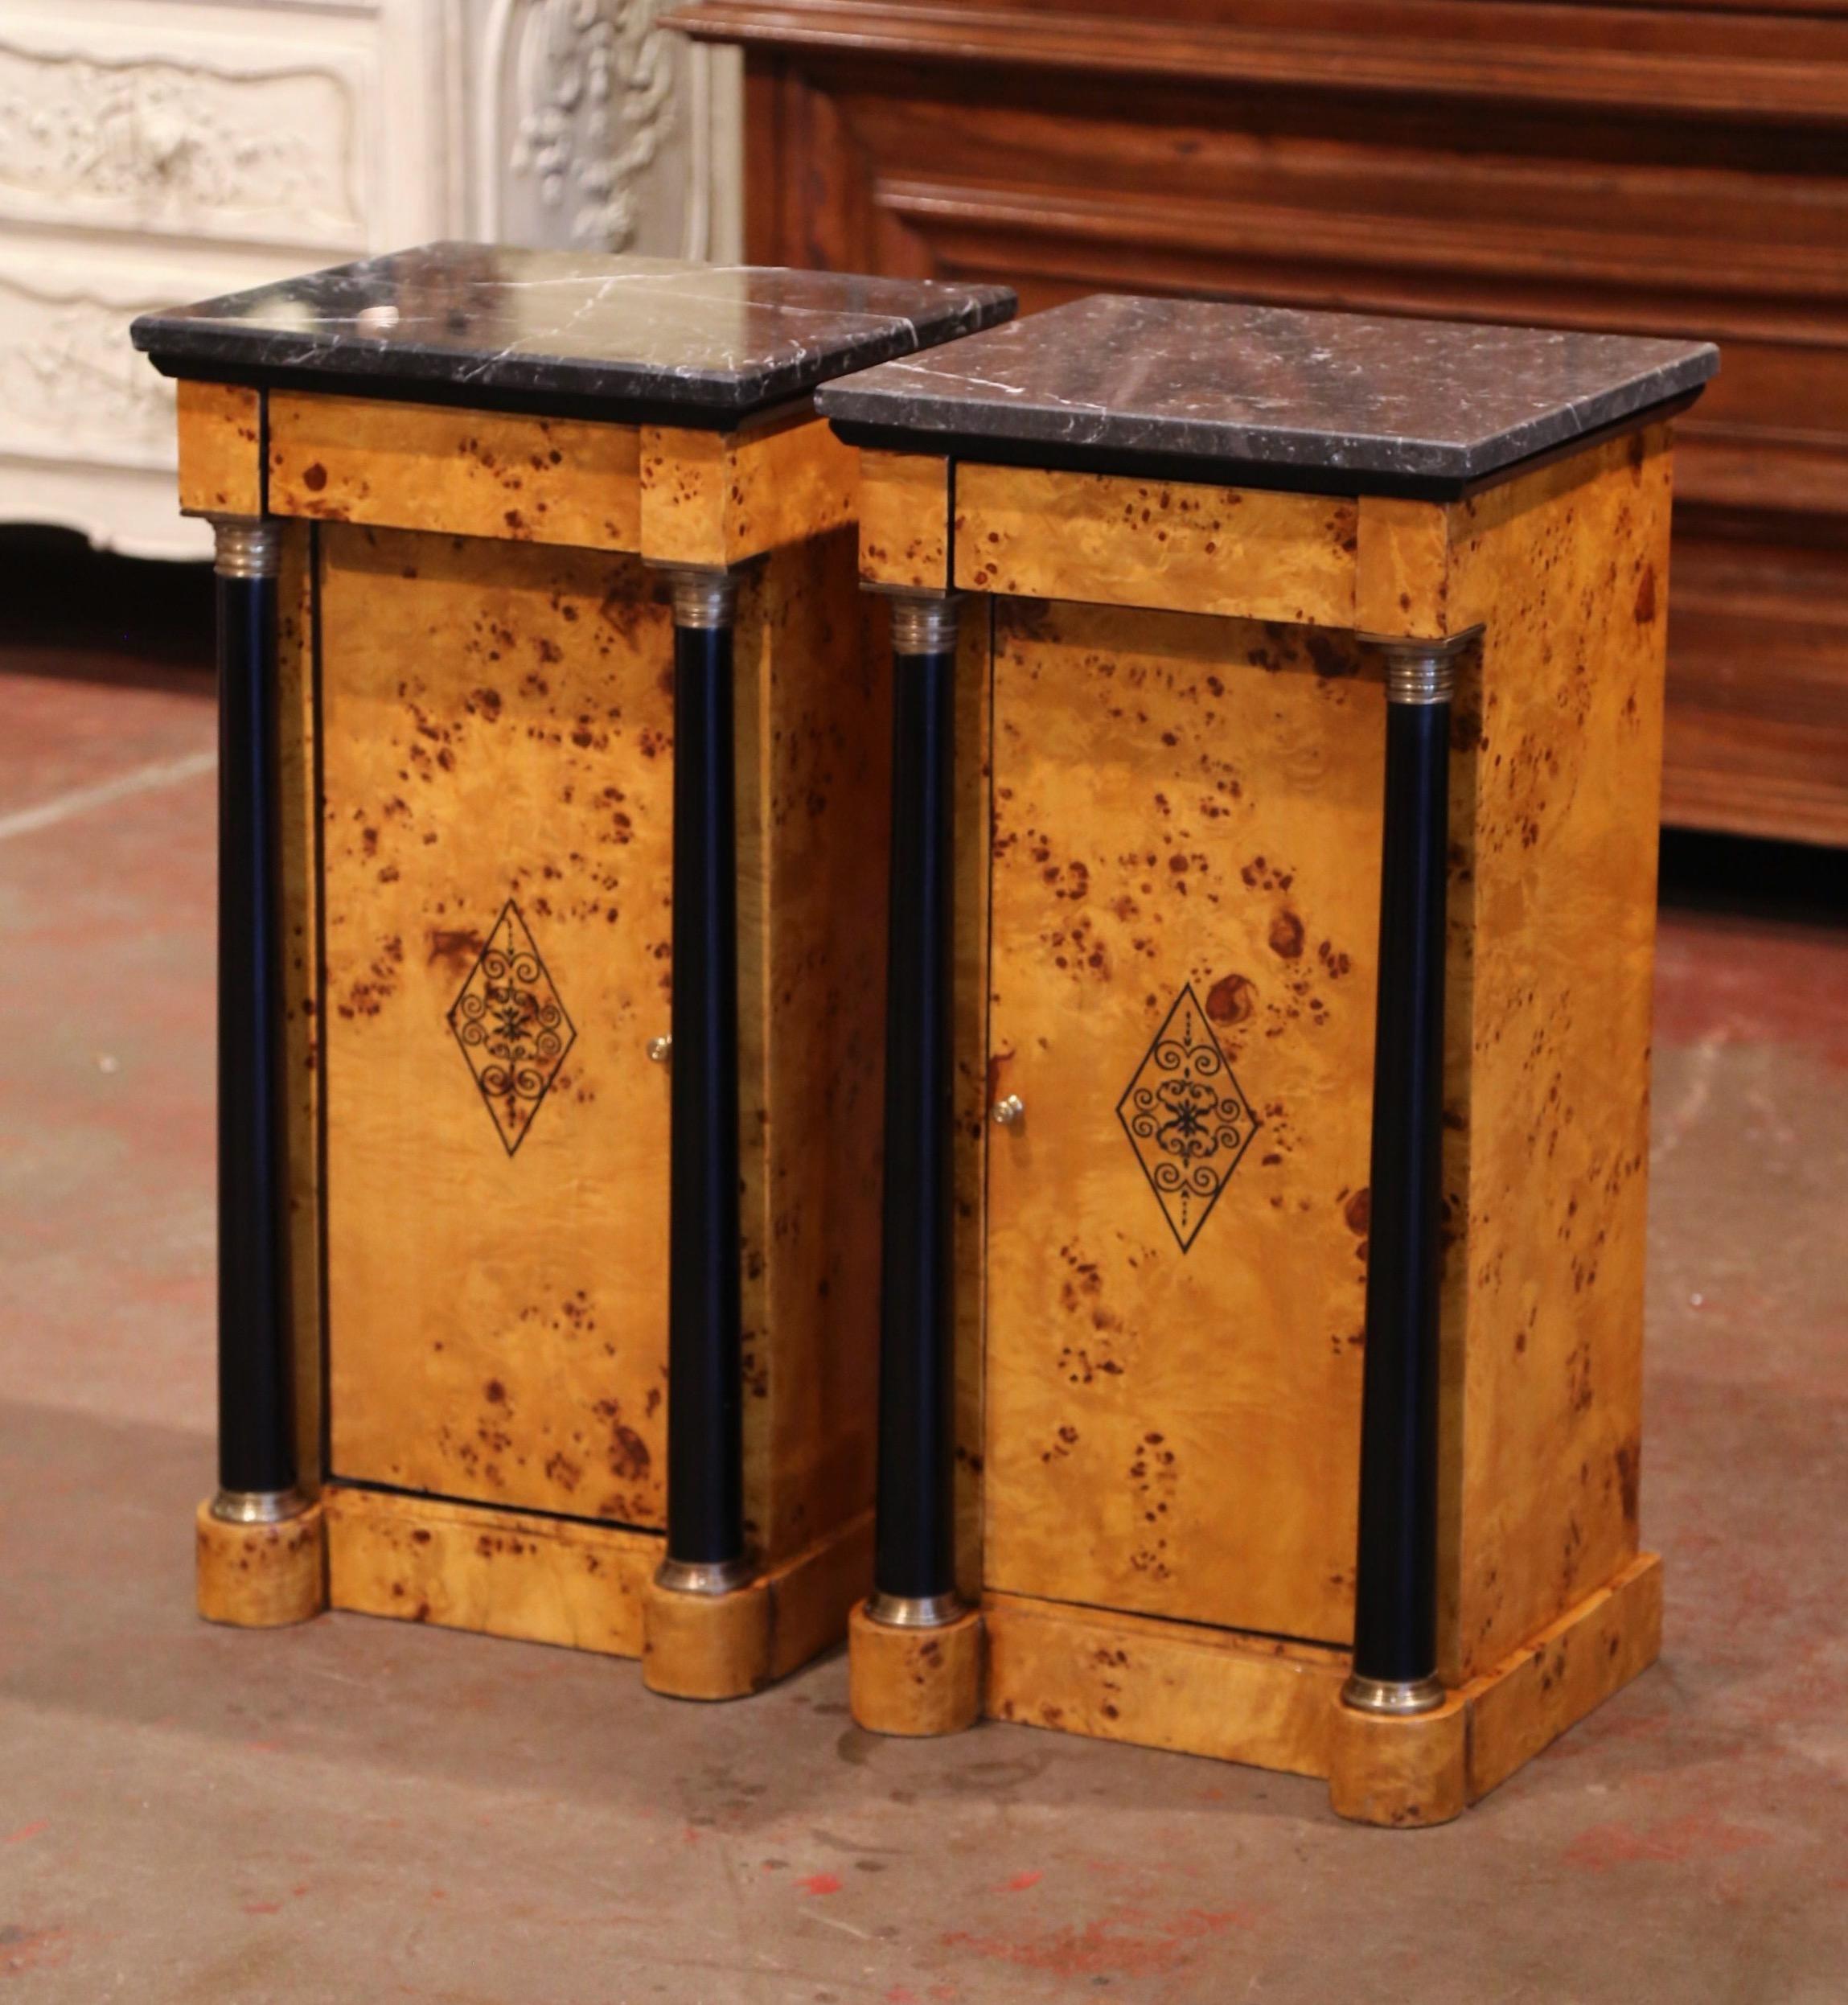 These elegant, antique bedside tables were created in France, circa 1890. Both matching cabinets made of elm wood stand on a thick plinth base; they feature a recessed center door decorated with a central motif, and are flanked by a pair of round,